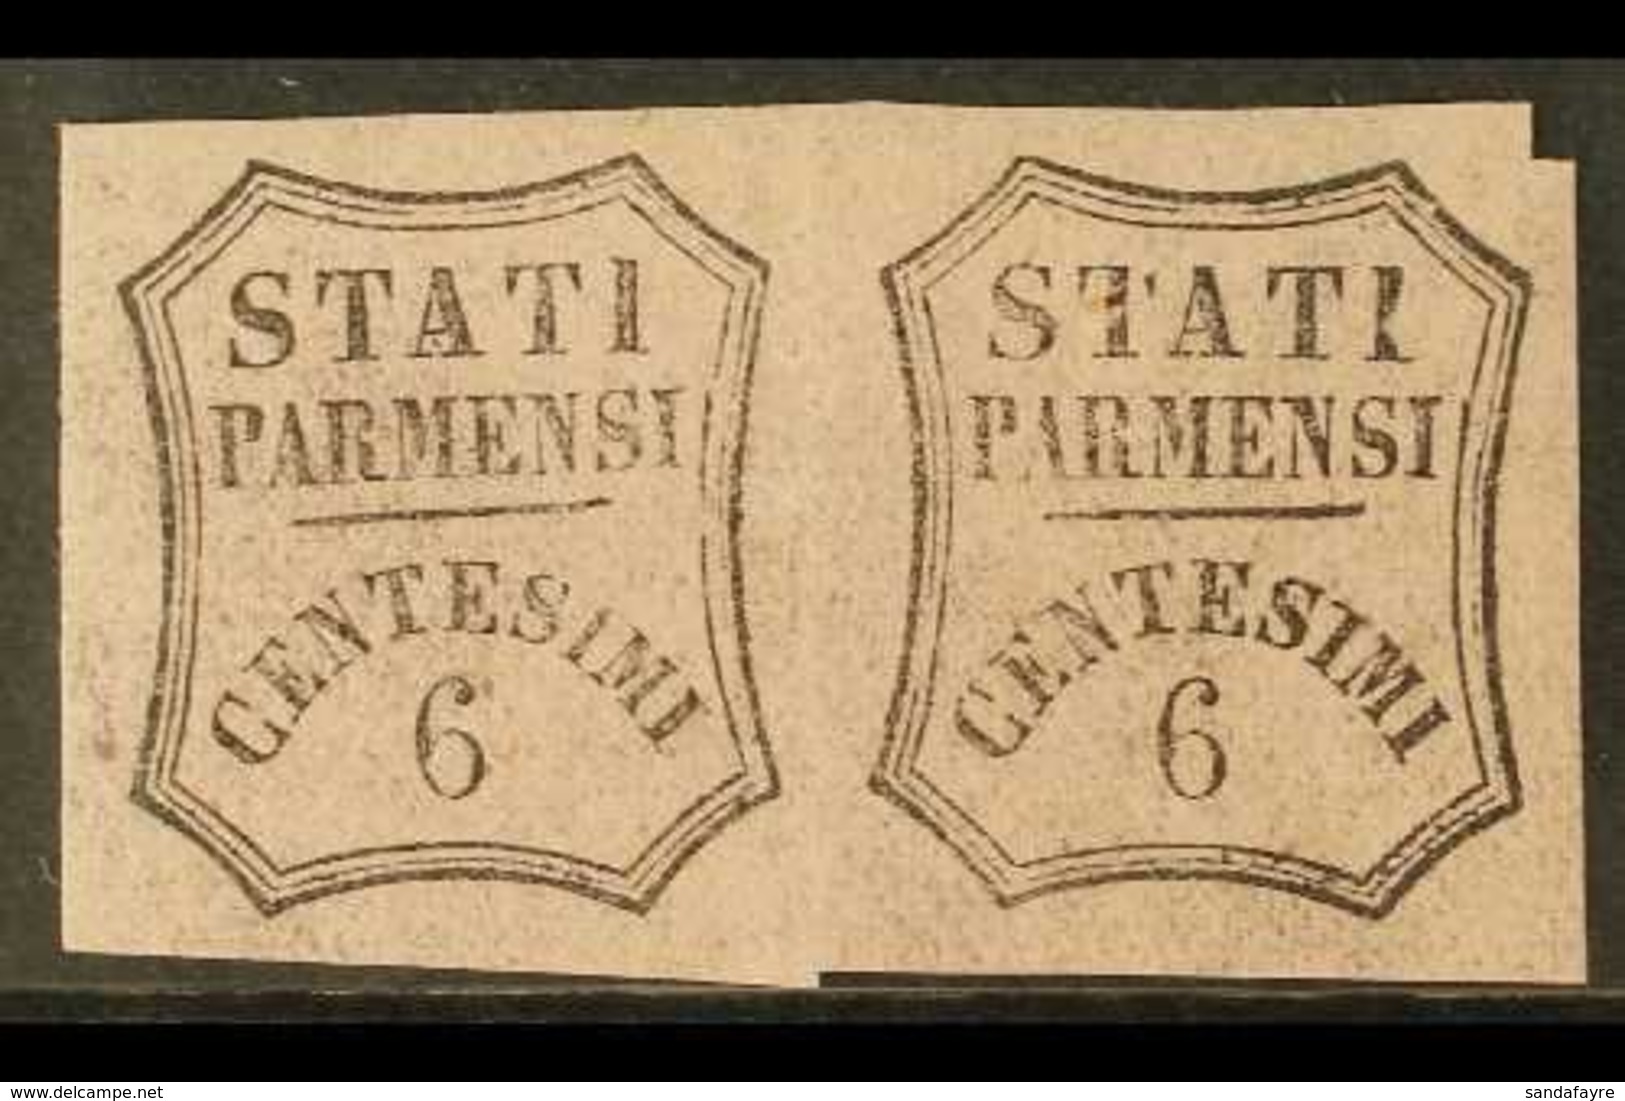 PARMA  NEWSPAPER STAMPS 1857 6c Black On Pale Rose, Unissued, Sass1A, Very Fine Mint Pair. For More Images, Please Visit - Zonder Classificatie